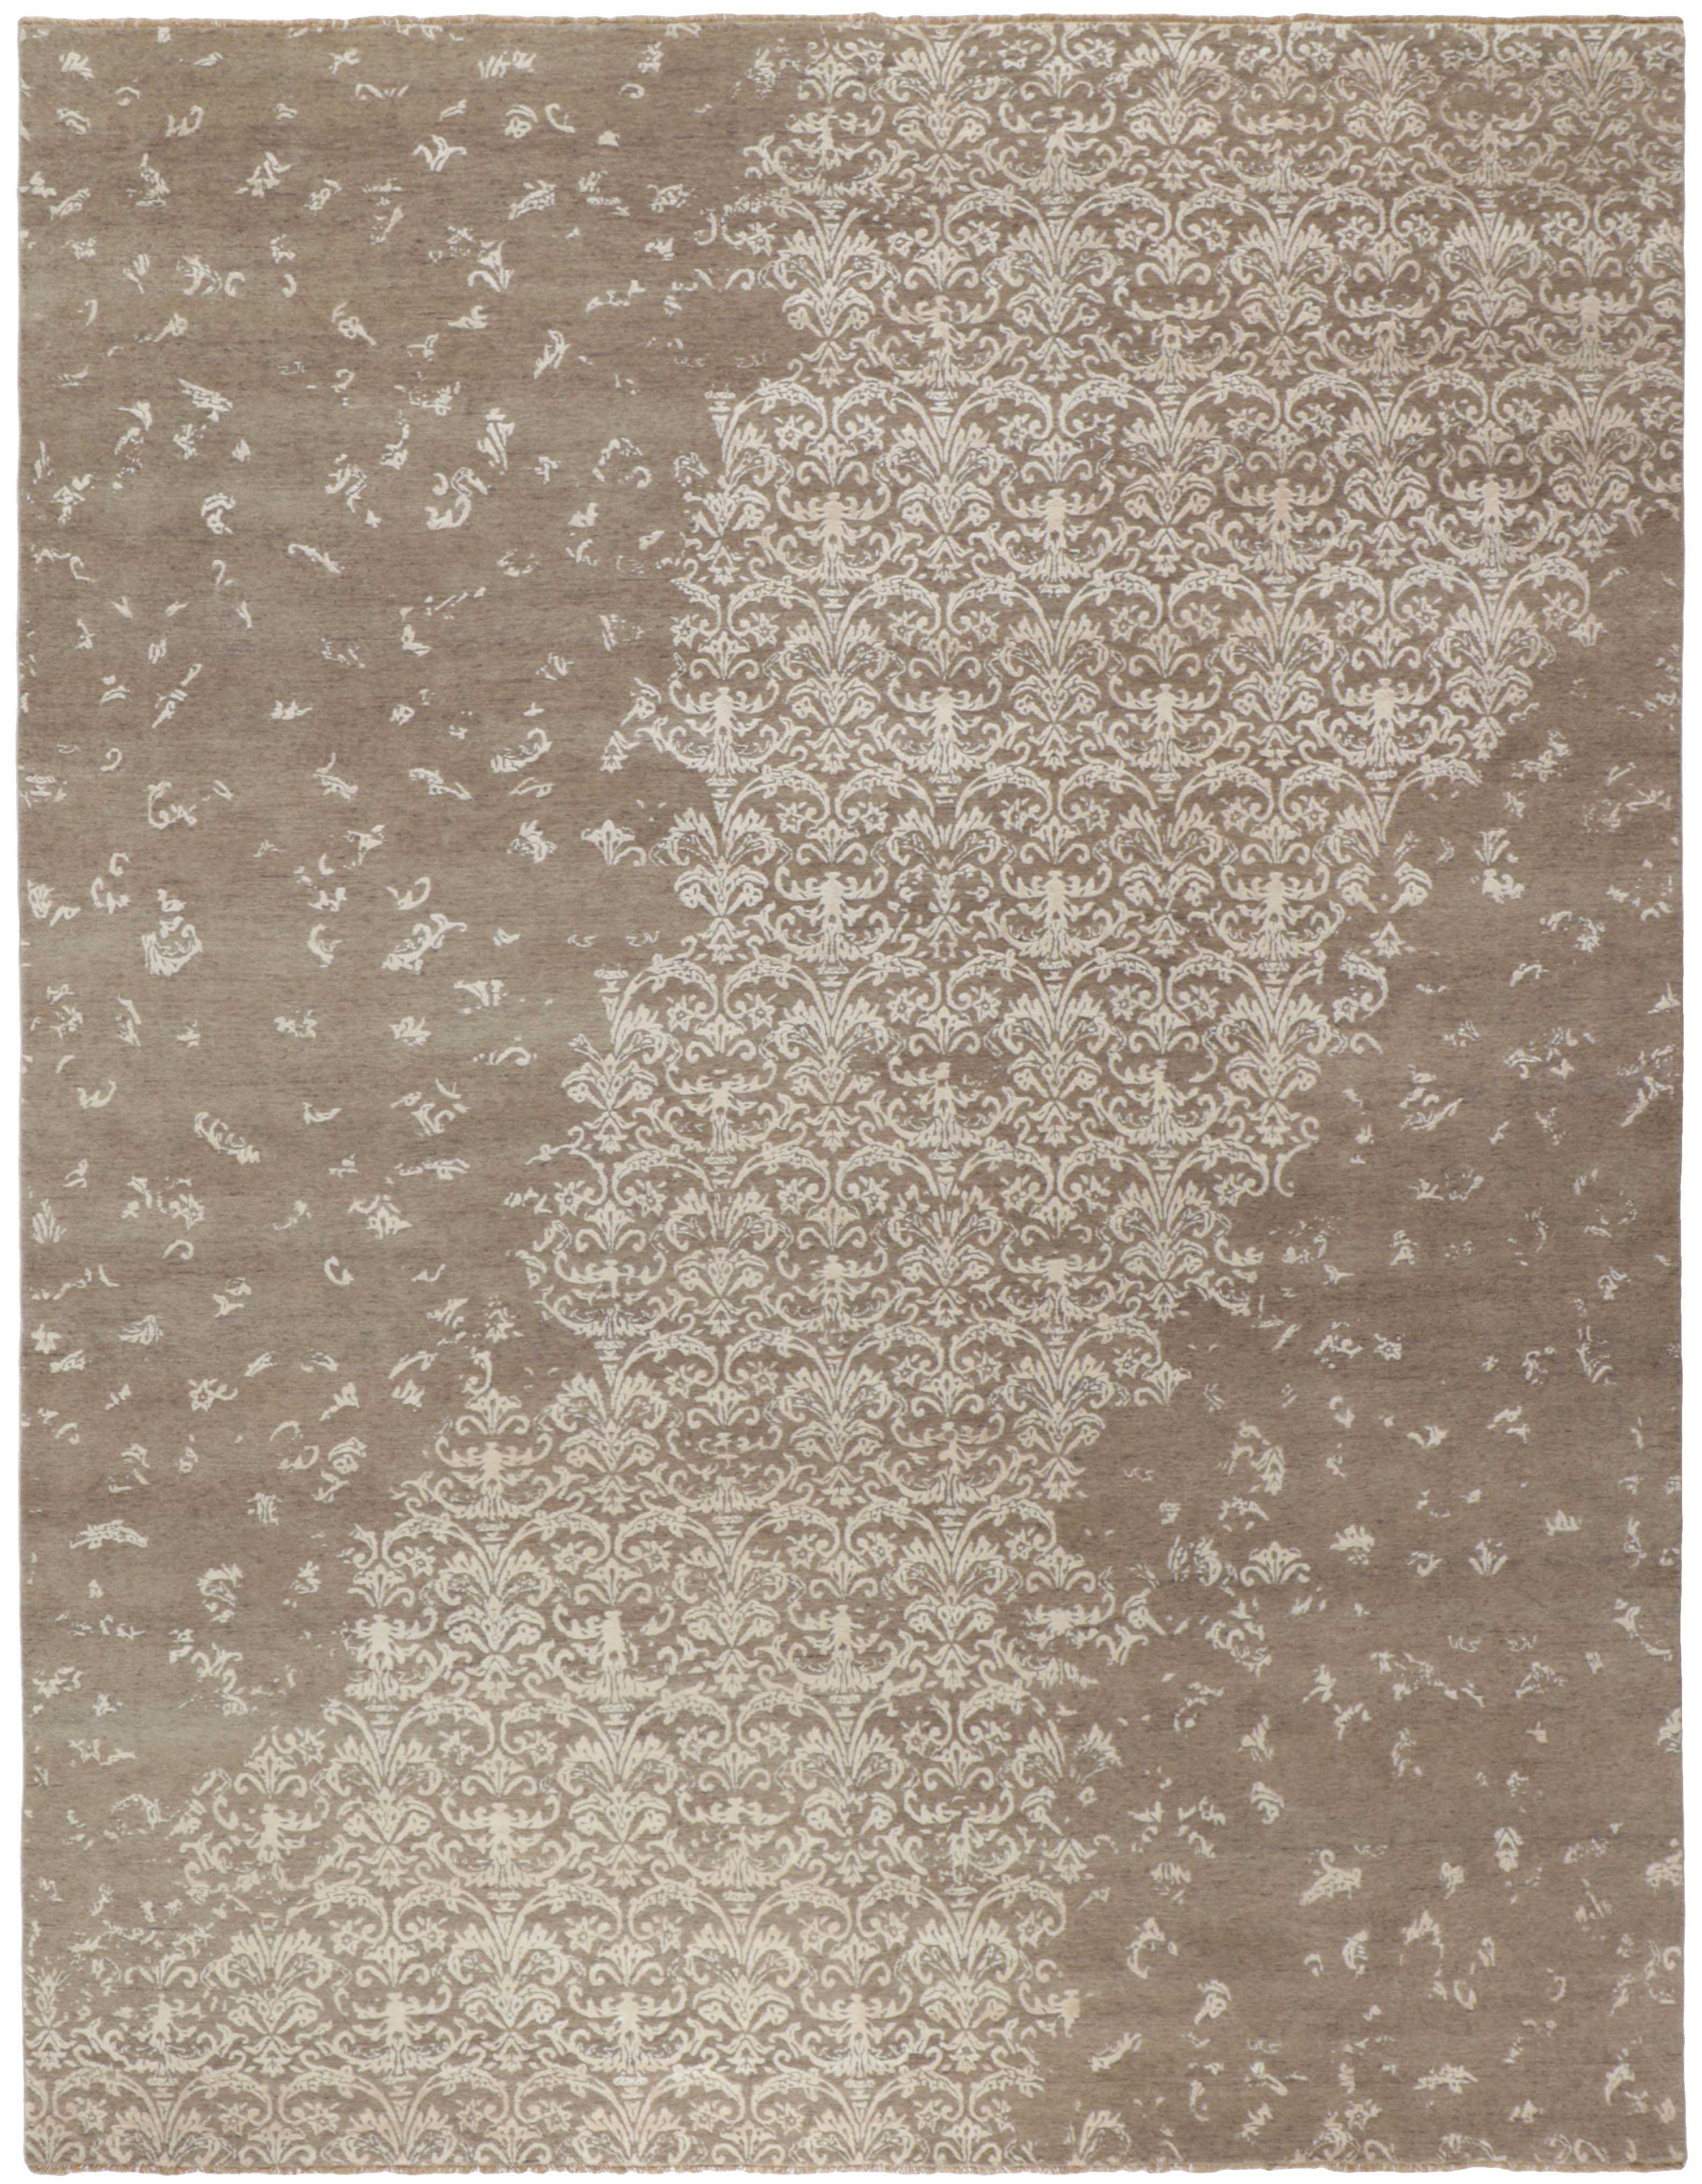 Authentic oriental rug with a damask pattern in cream